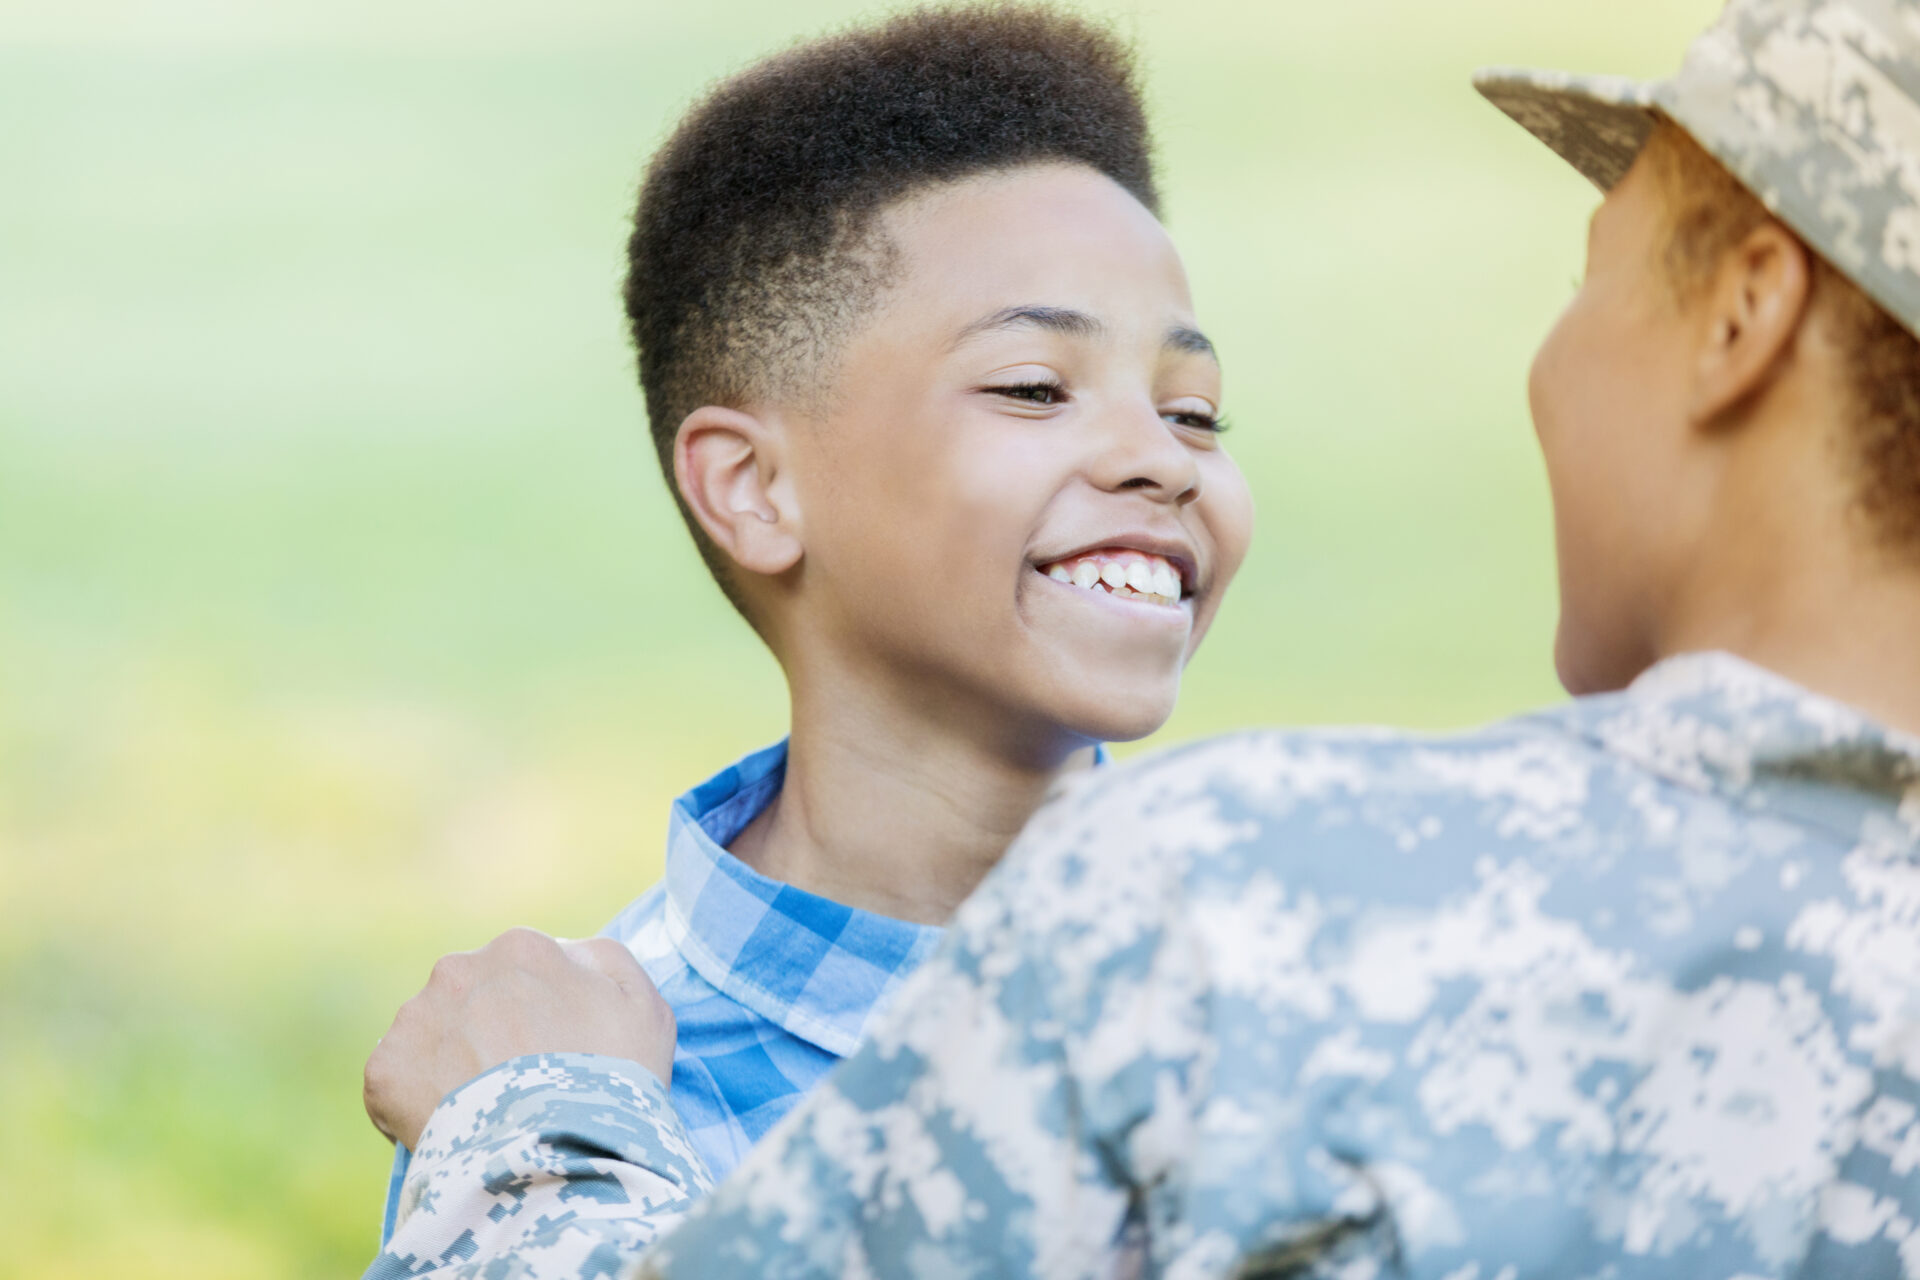 Preteen boy smiles while reuniting with his military mom.